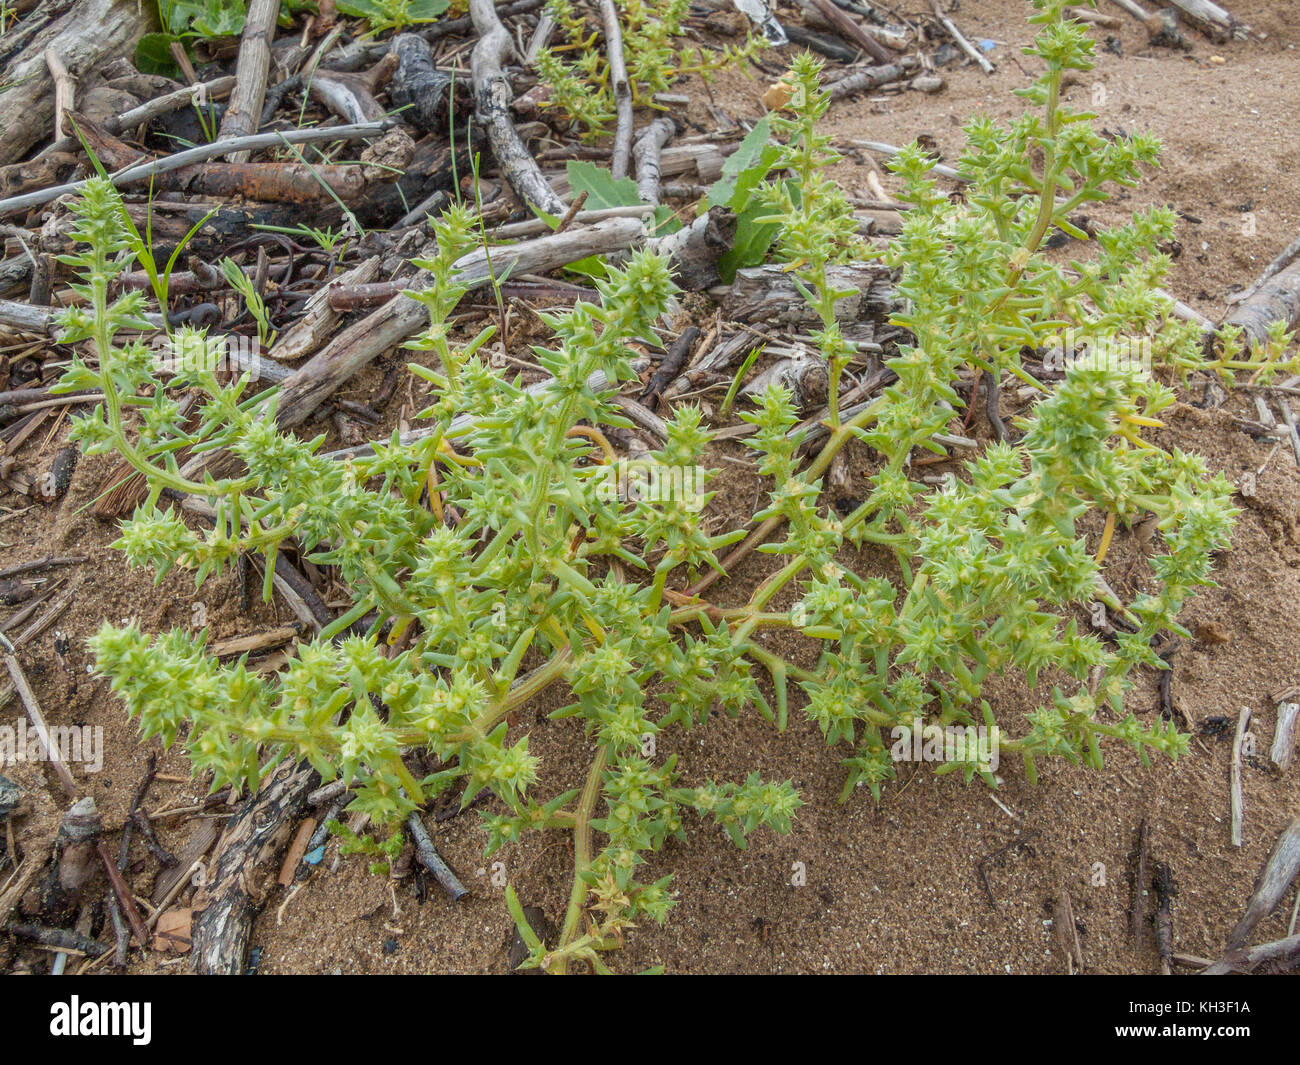 Prickly foliage of Prickly Saltwort / Salsola kali. Soda ash from this plant was once used for making glass. Stock Photo